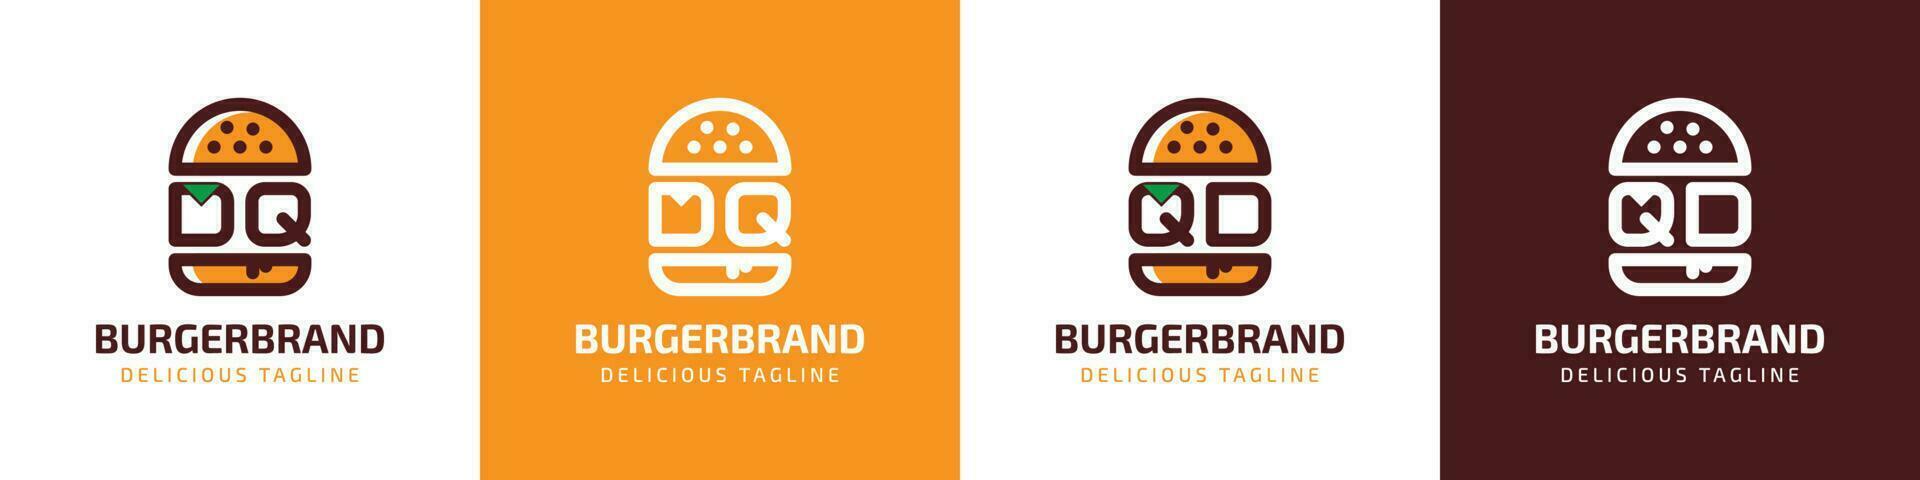 Letter DQ and QD Burger Logo, suitable for any business related to burger with DQ or QD initials. vector